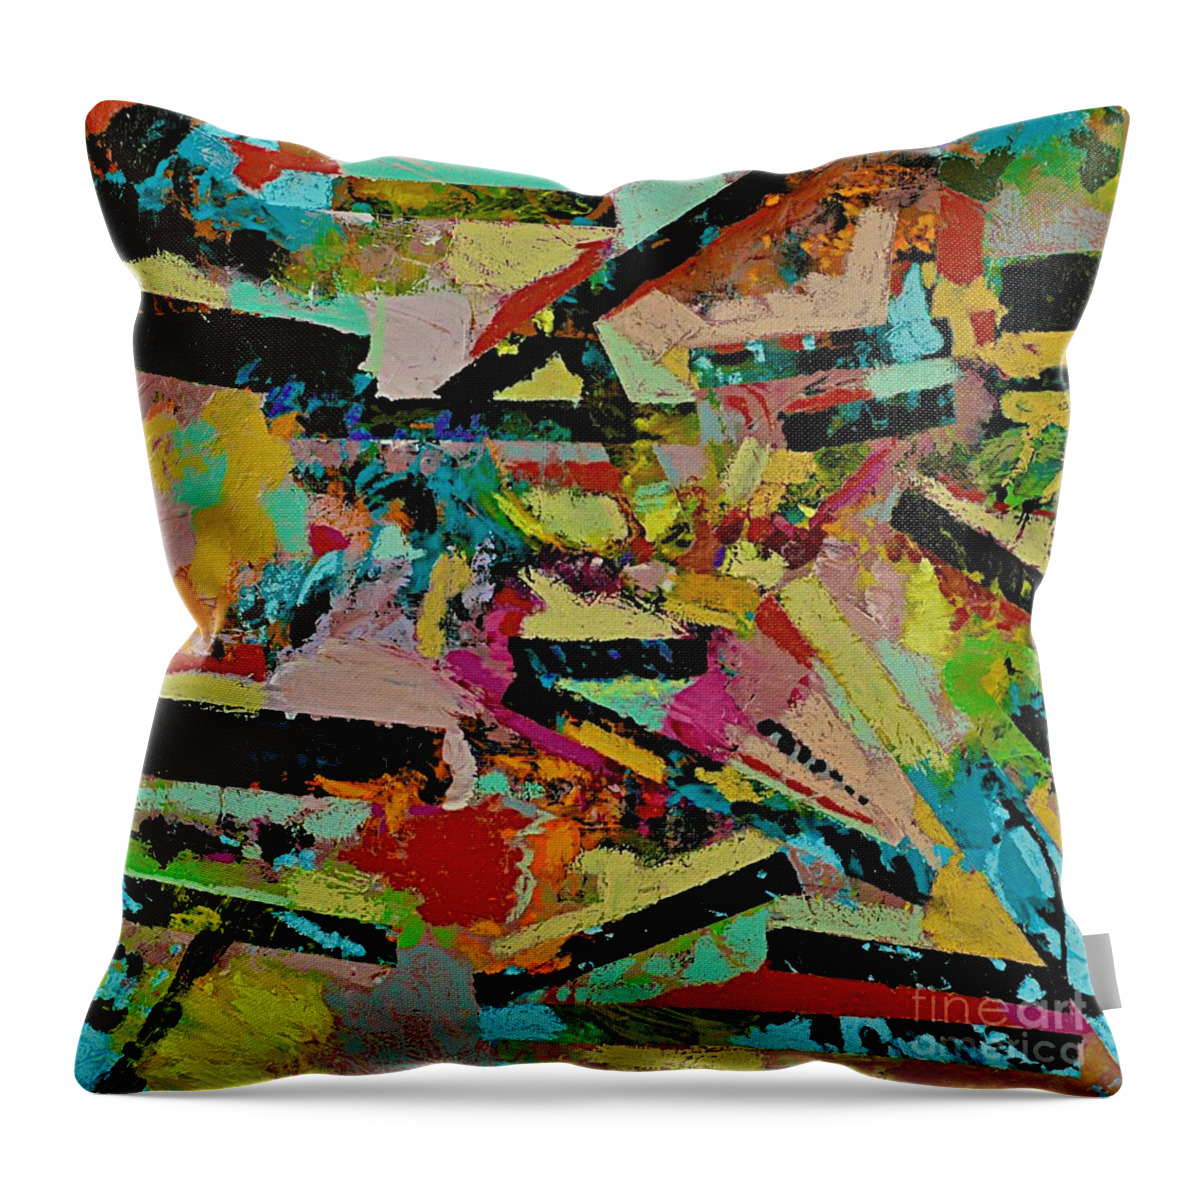 Landscape Throw Pillow featuring the painting Cotton Crystal by Allan P Friedlander